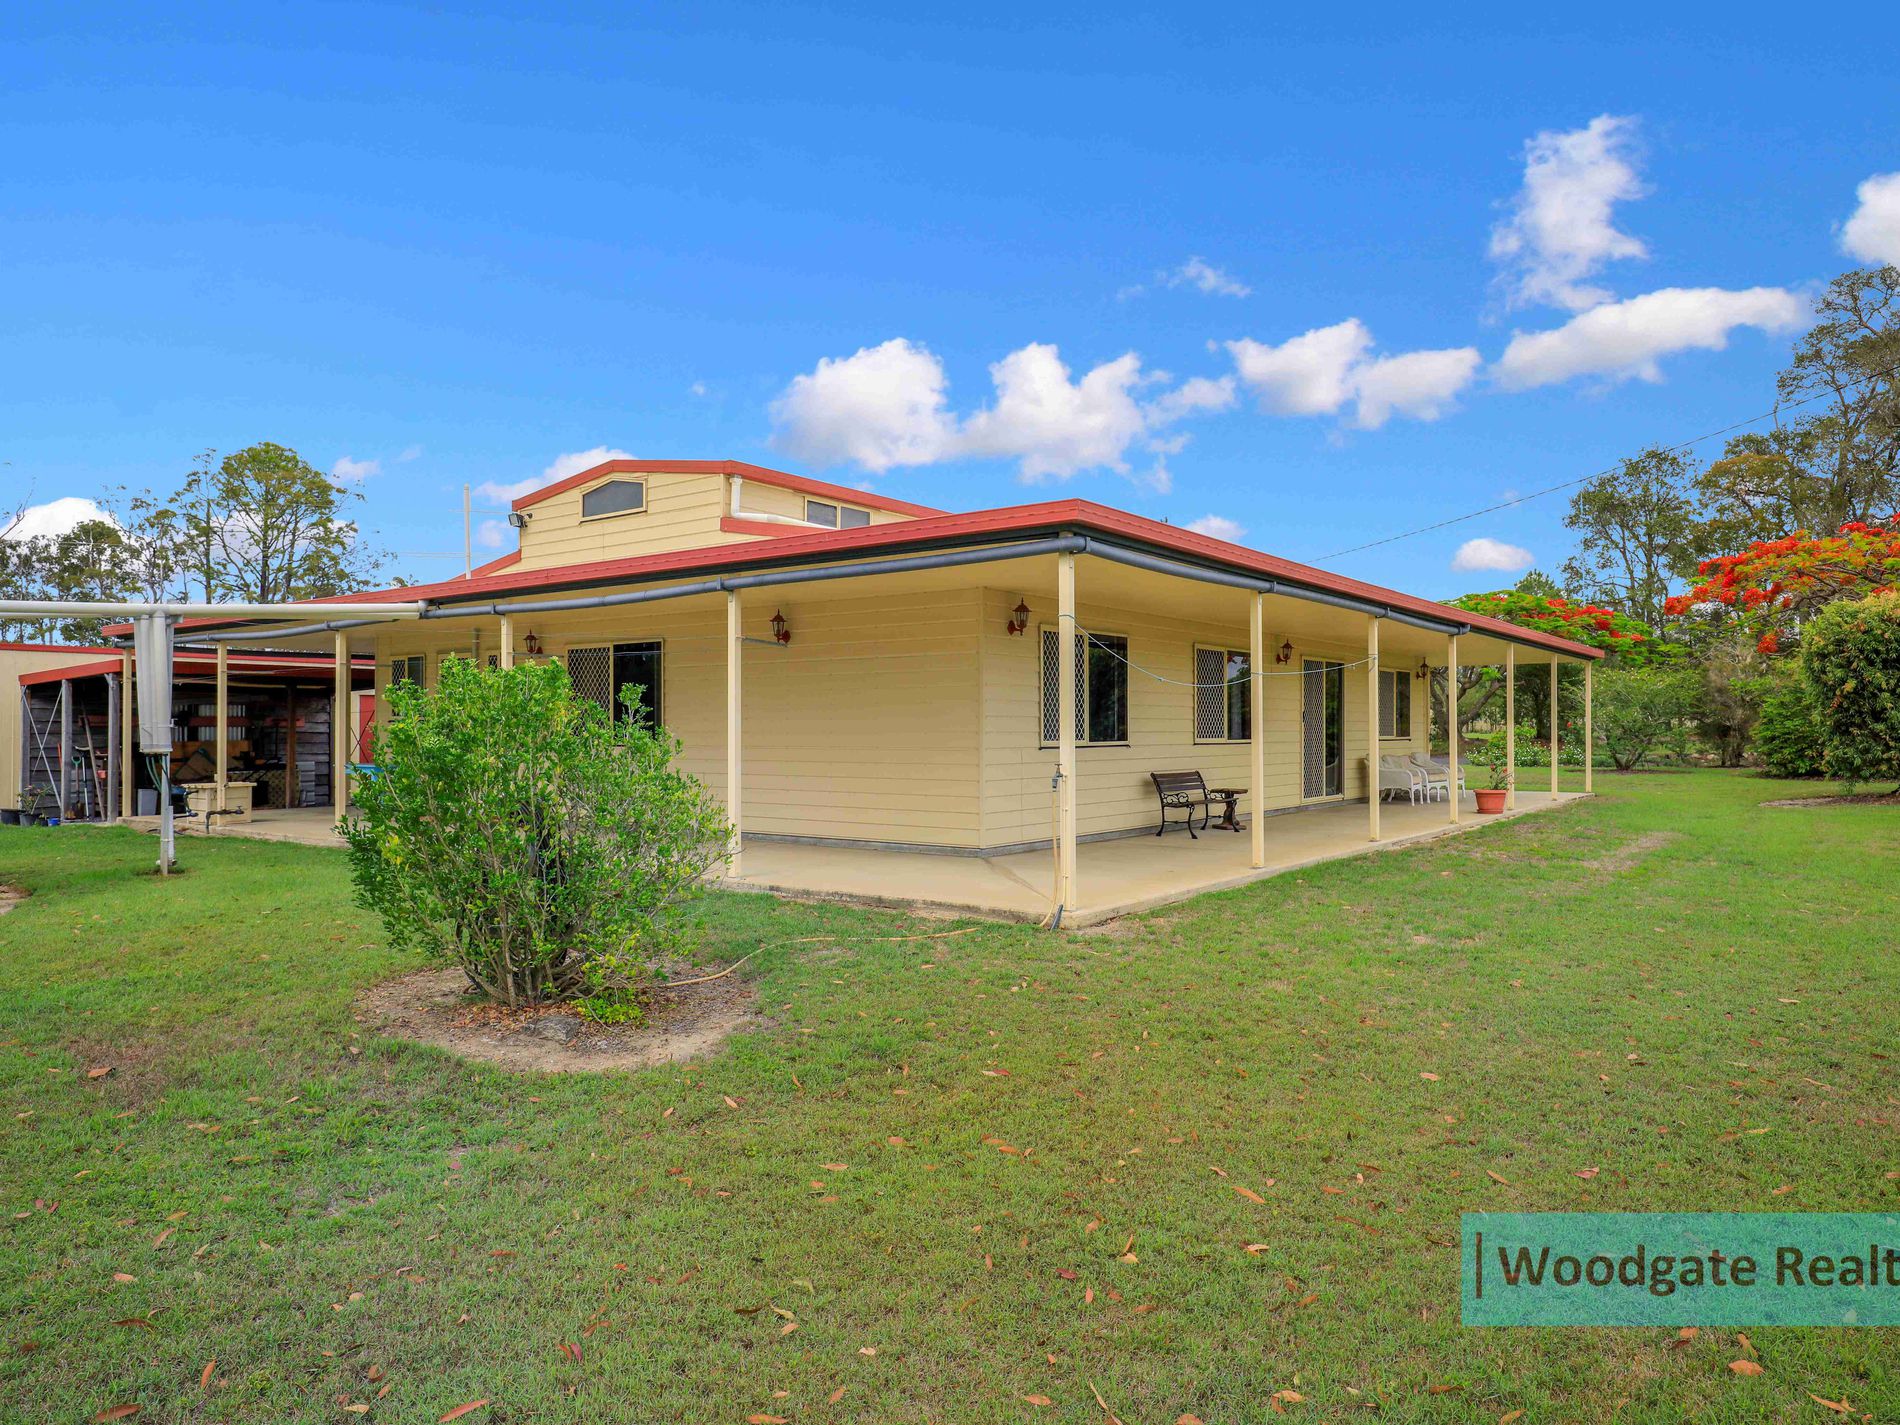 12 OLD WOODGATE ROAD, Goodwood